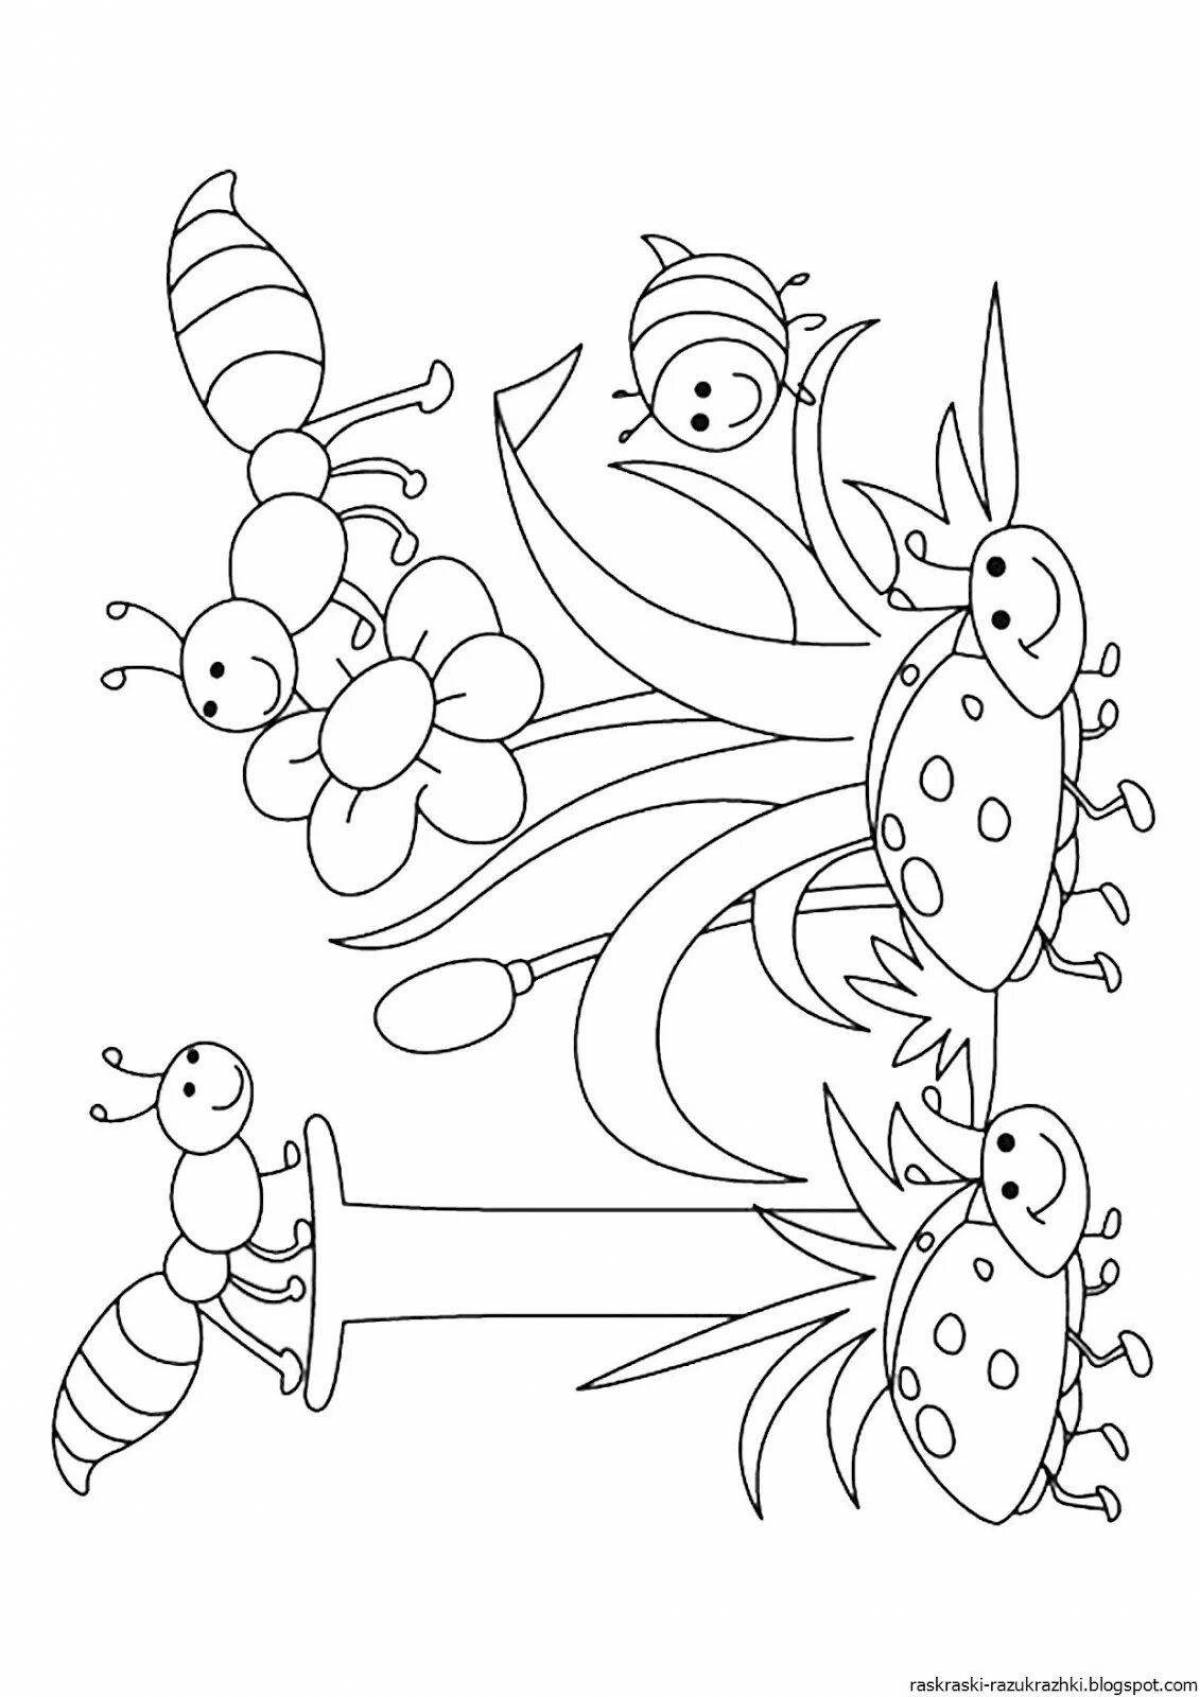 Coloring pages with playful insects for children 3-4 years old